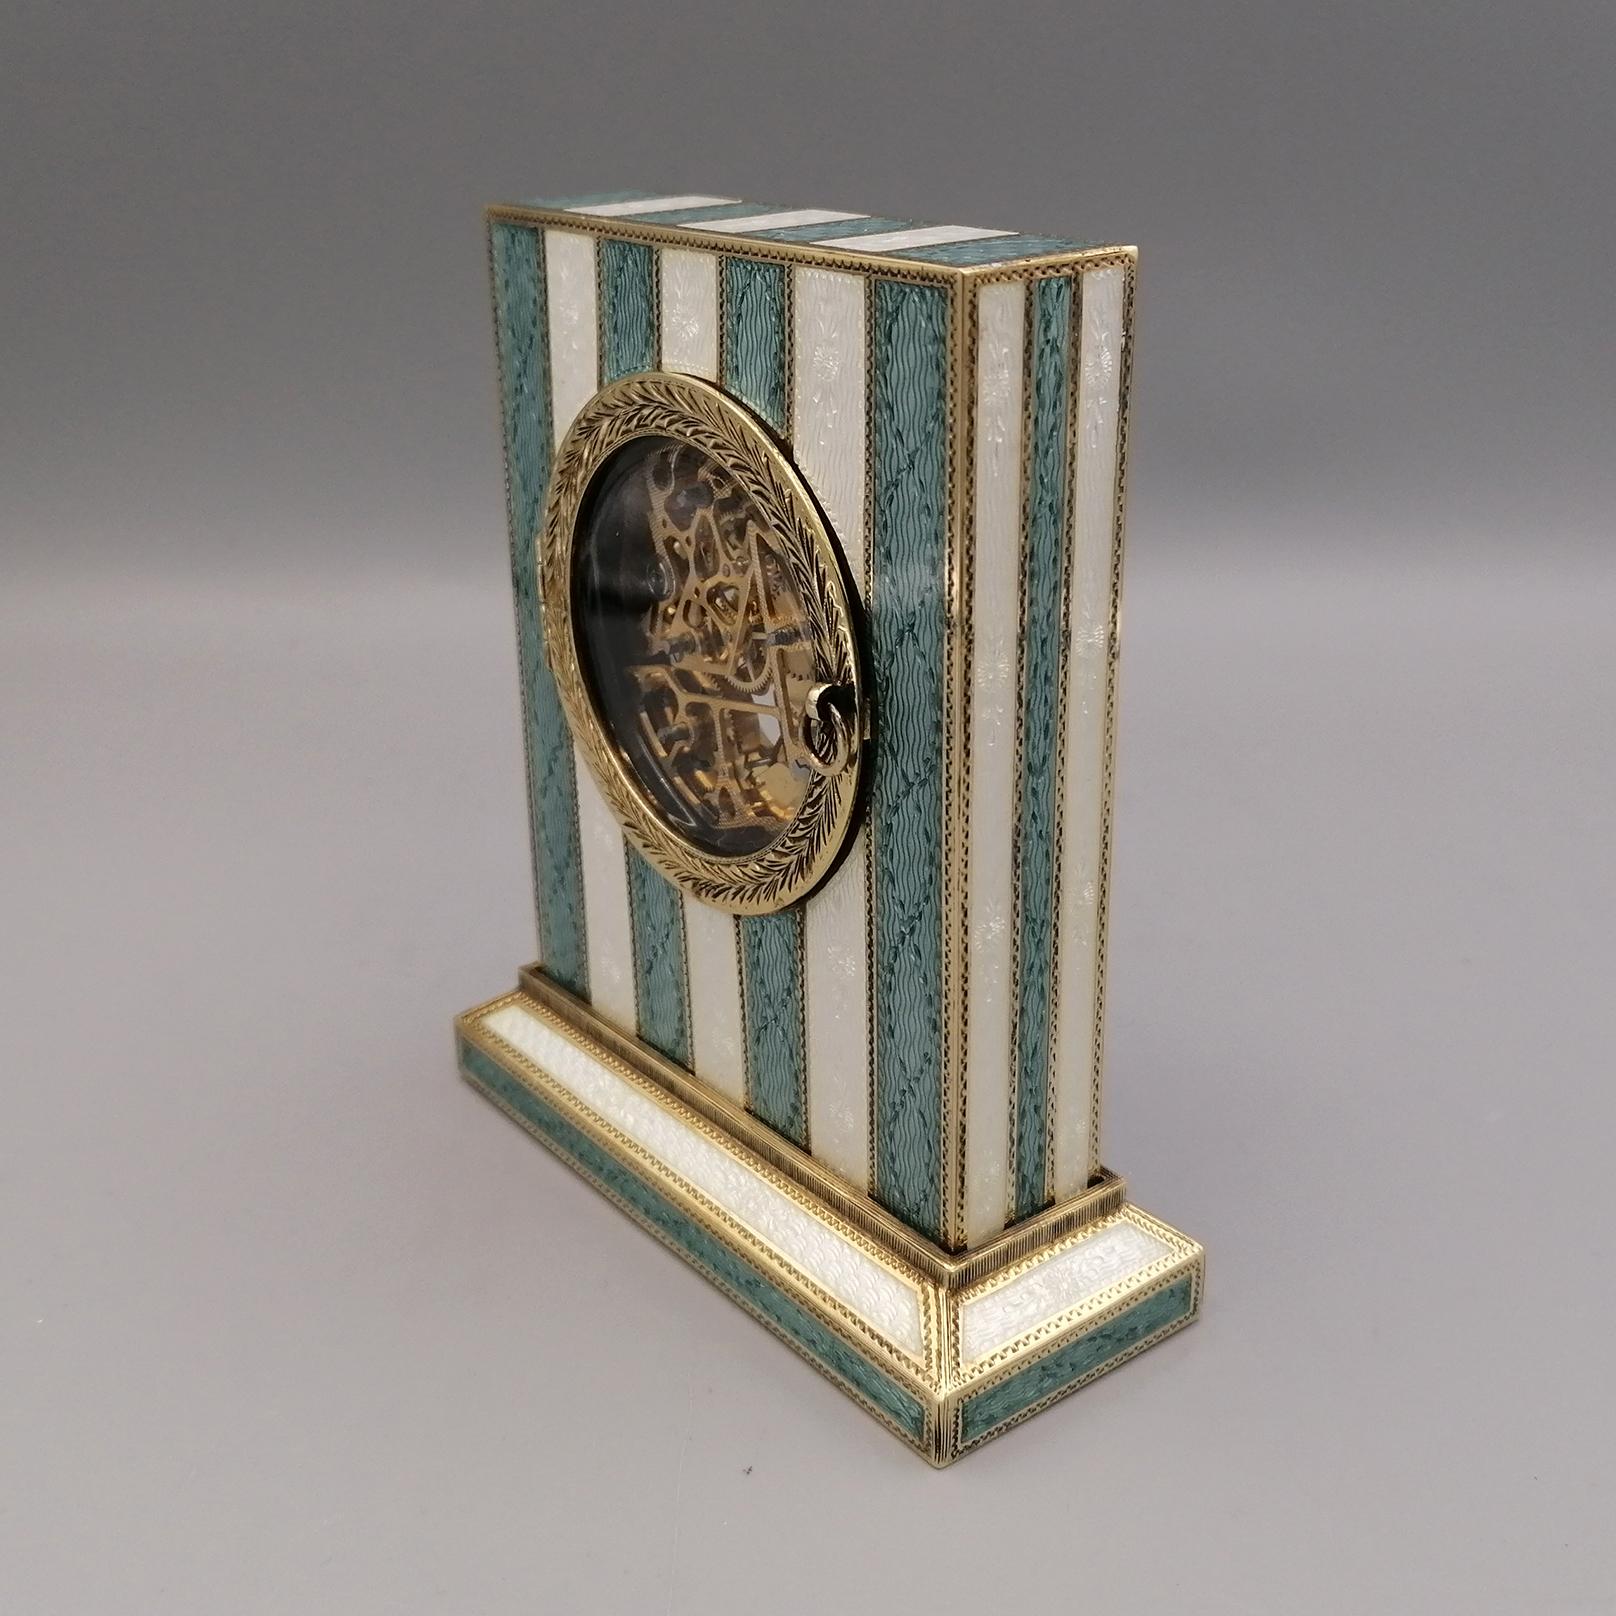 Silver table clock 925/1000 golden with translucent fire polishes in stripes on hand-engraved guillochè, Swiss mechanical skeletal movement 8 days

The miniatures are hand-painted on a usually white homogeneous enamel base. The same colored glazes